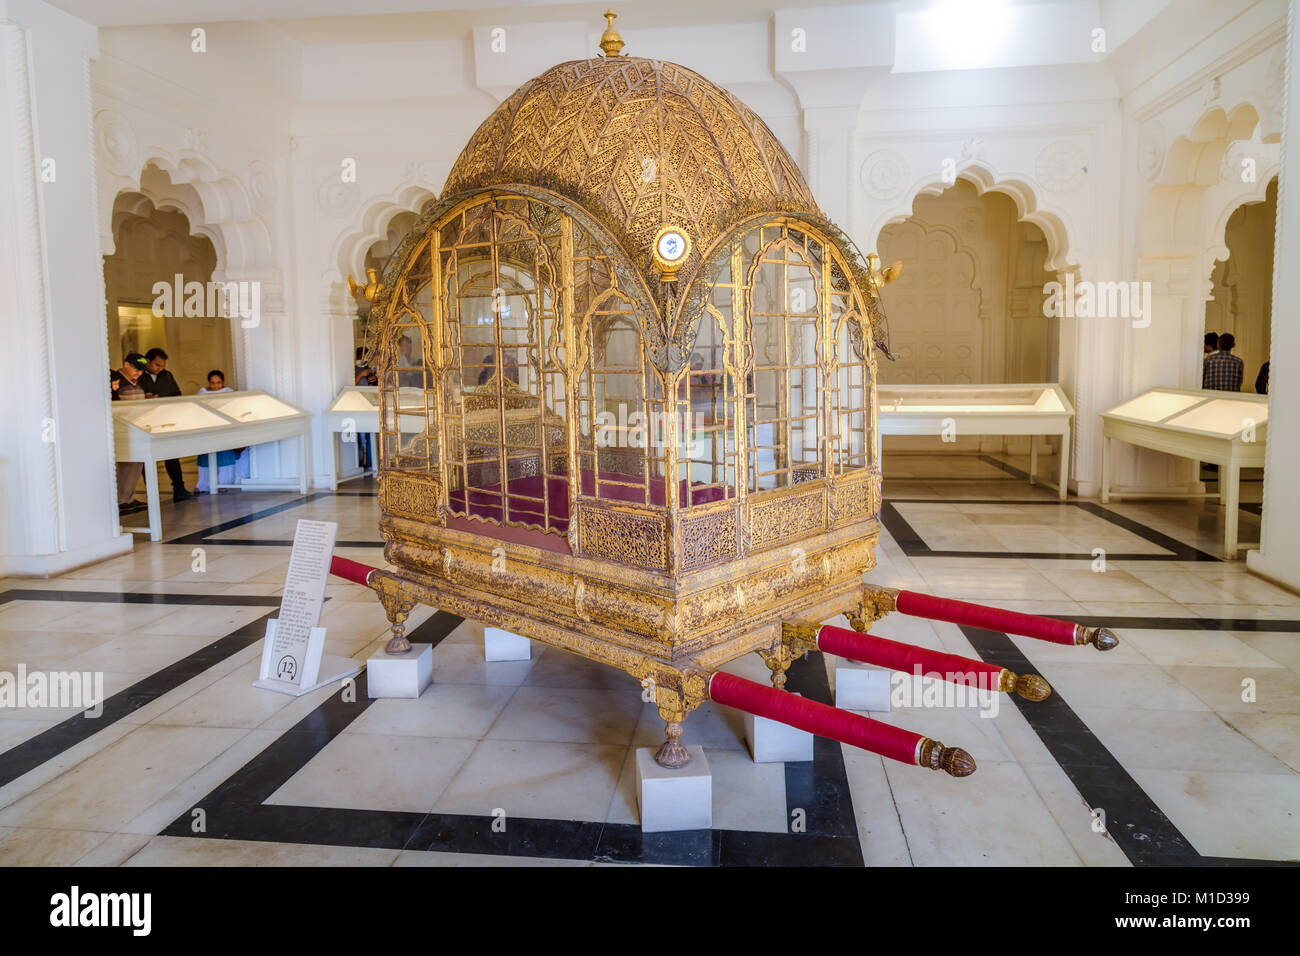 Ancient royal gold palanquin (mode of transportation) on display at the museum in Mehrangarh Fort, Jodhpur, Rajasthan India. Stock Photo